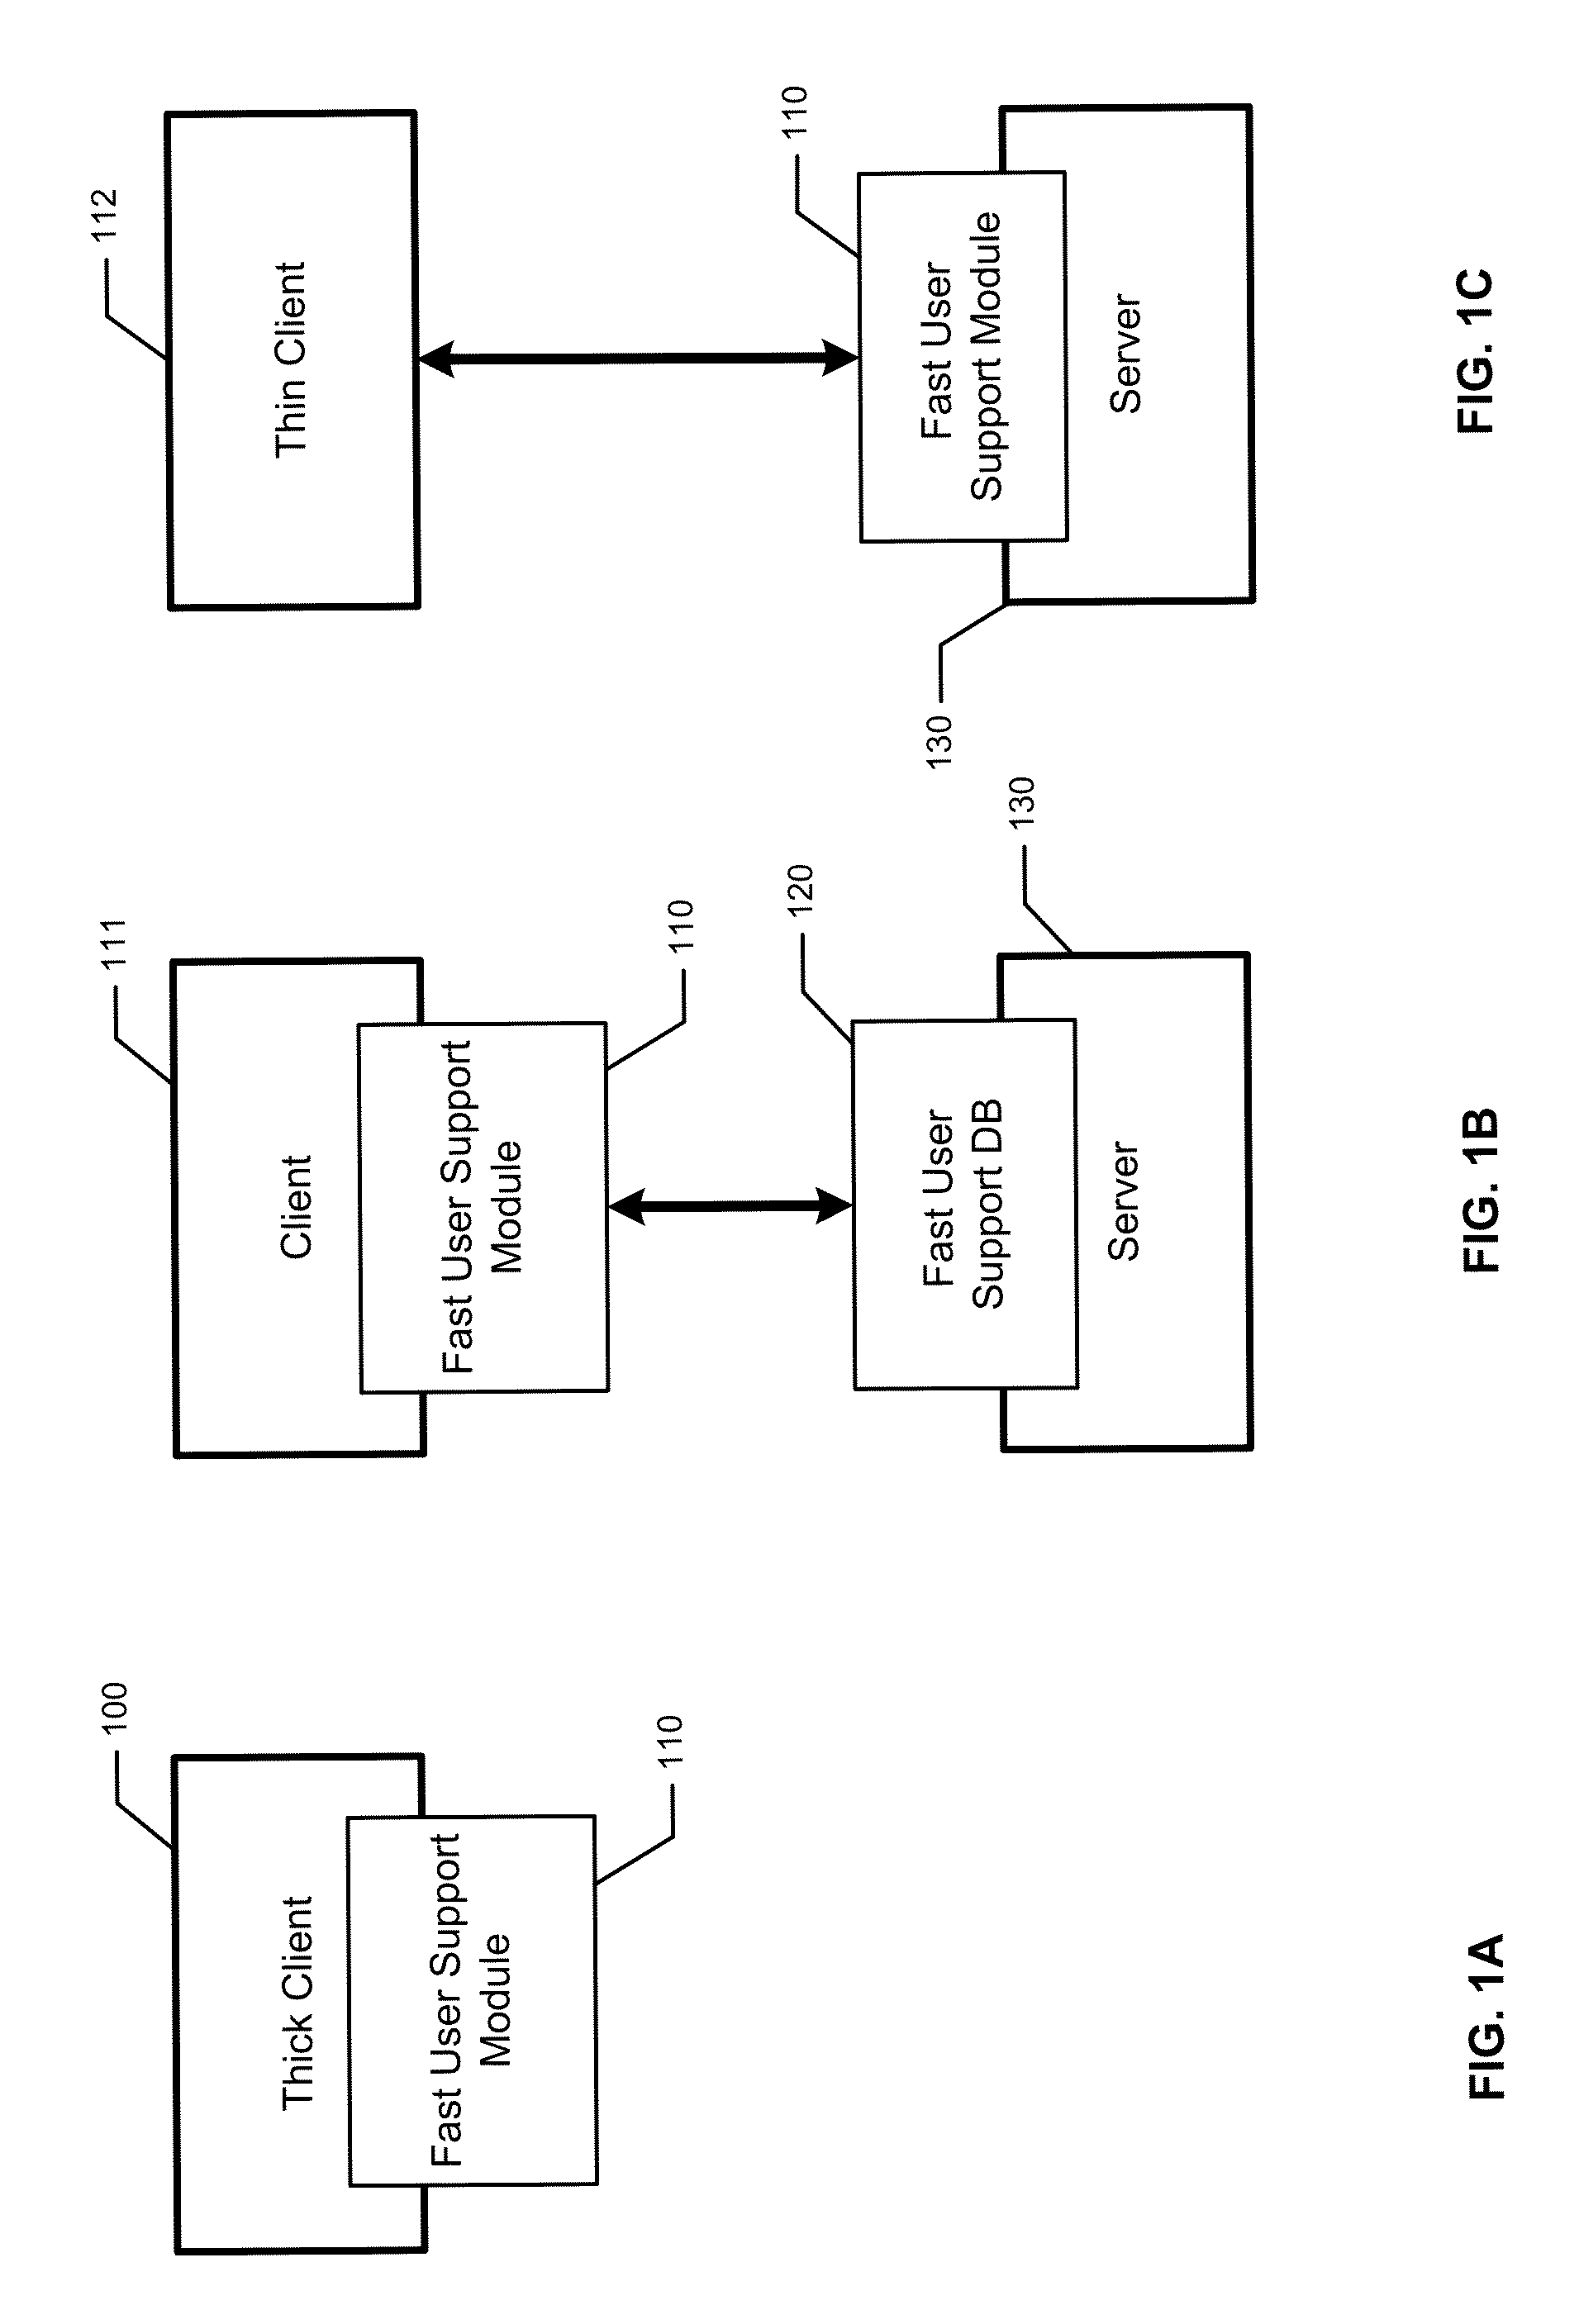 System and method for automated solution of functionality problems in computer systems